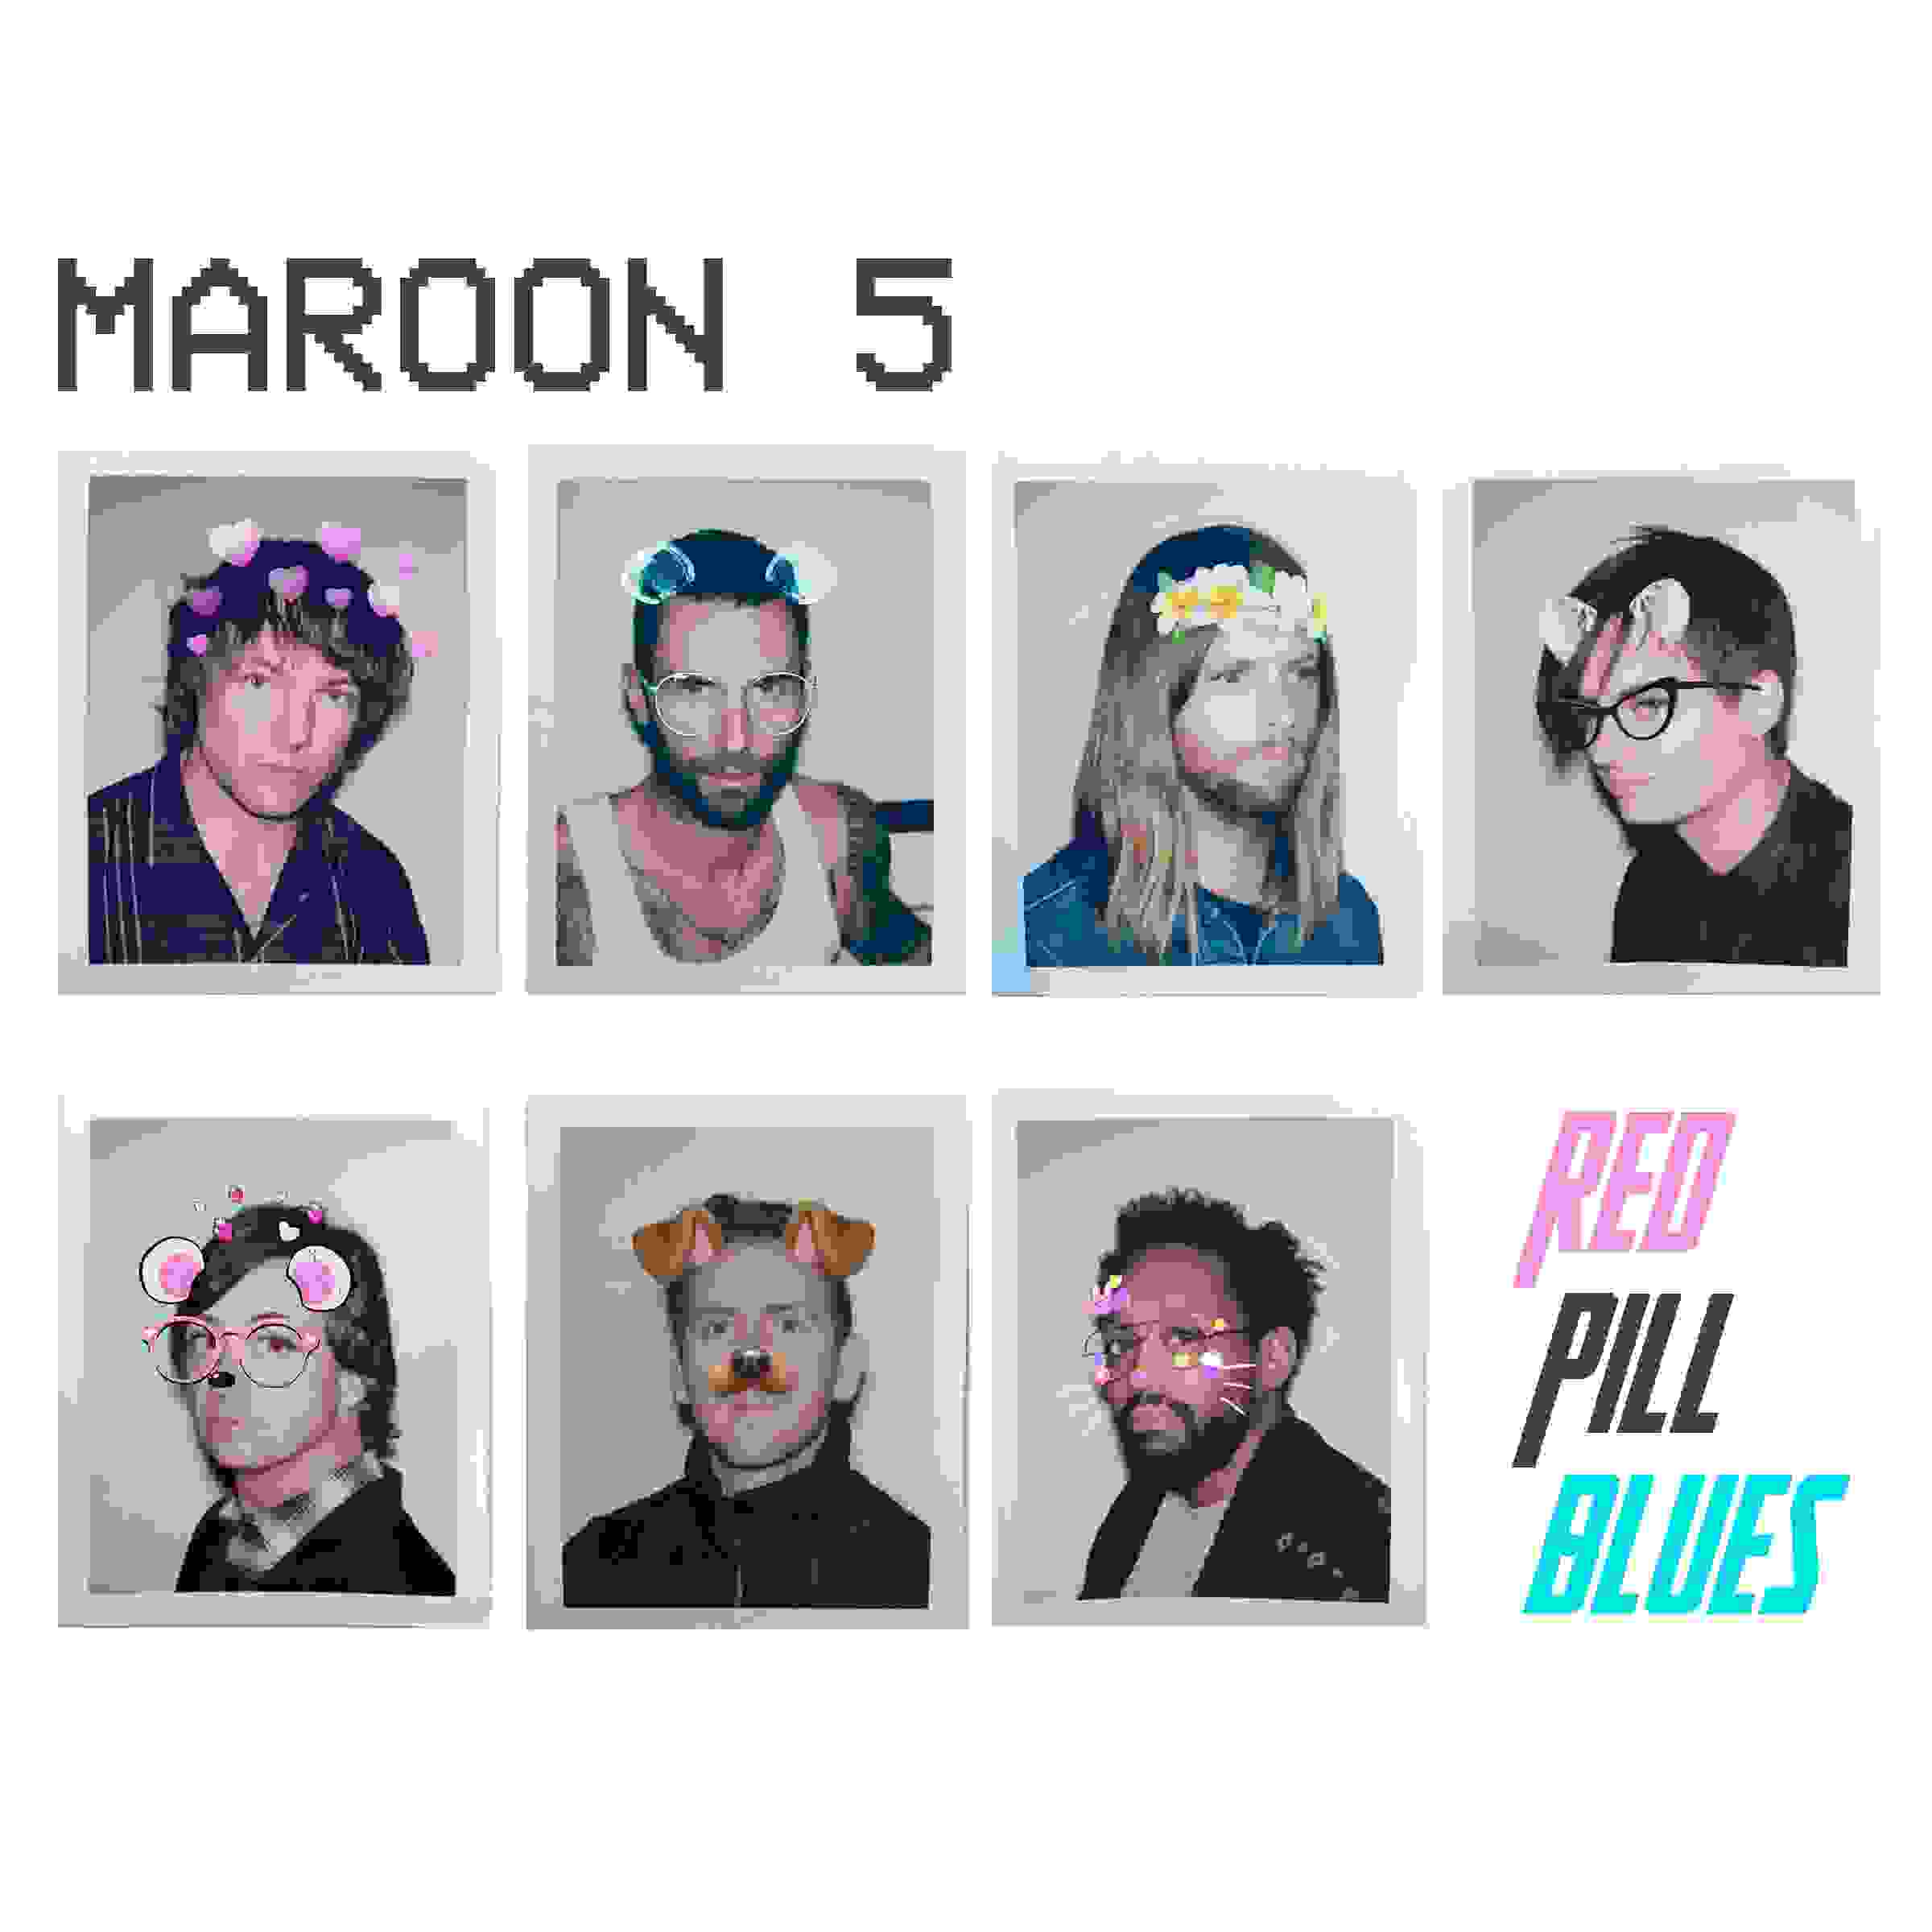 CD Shop - MAROON 5 RED PILL BLUES